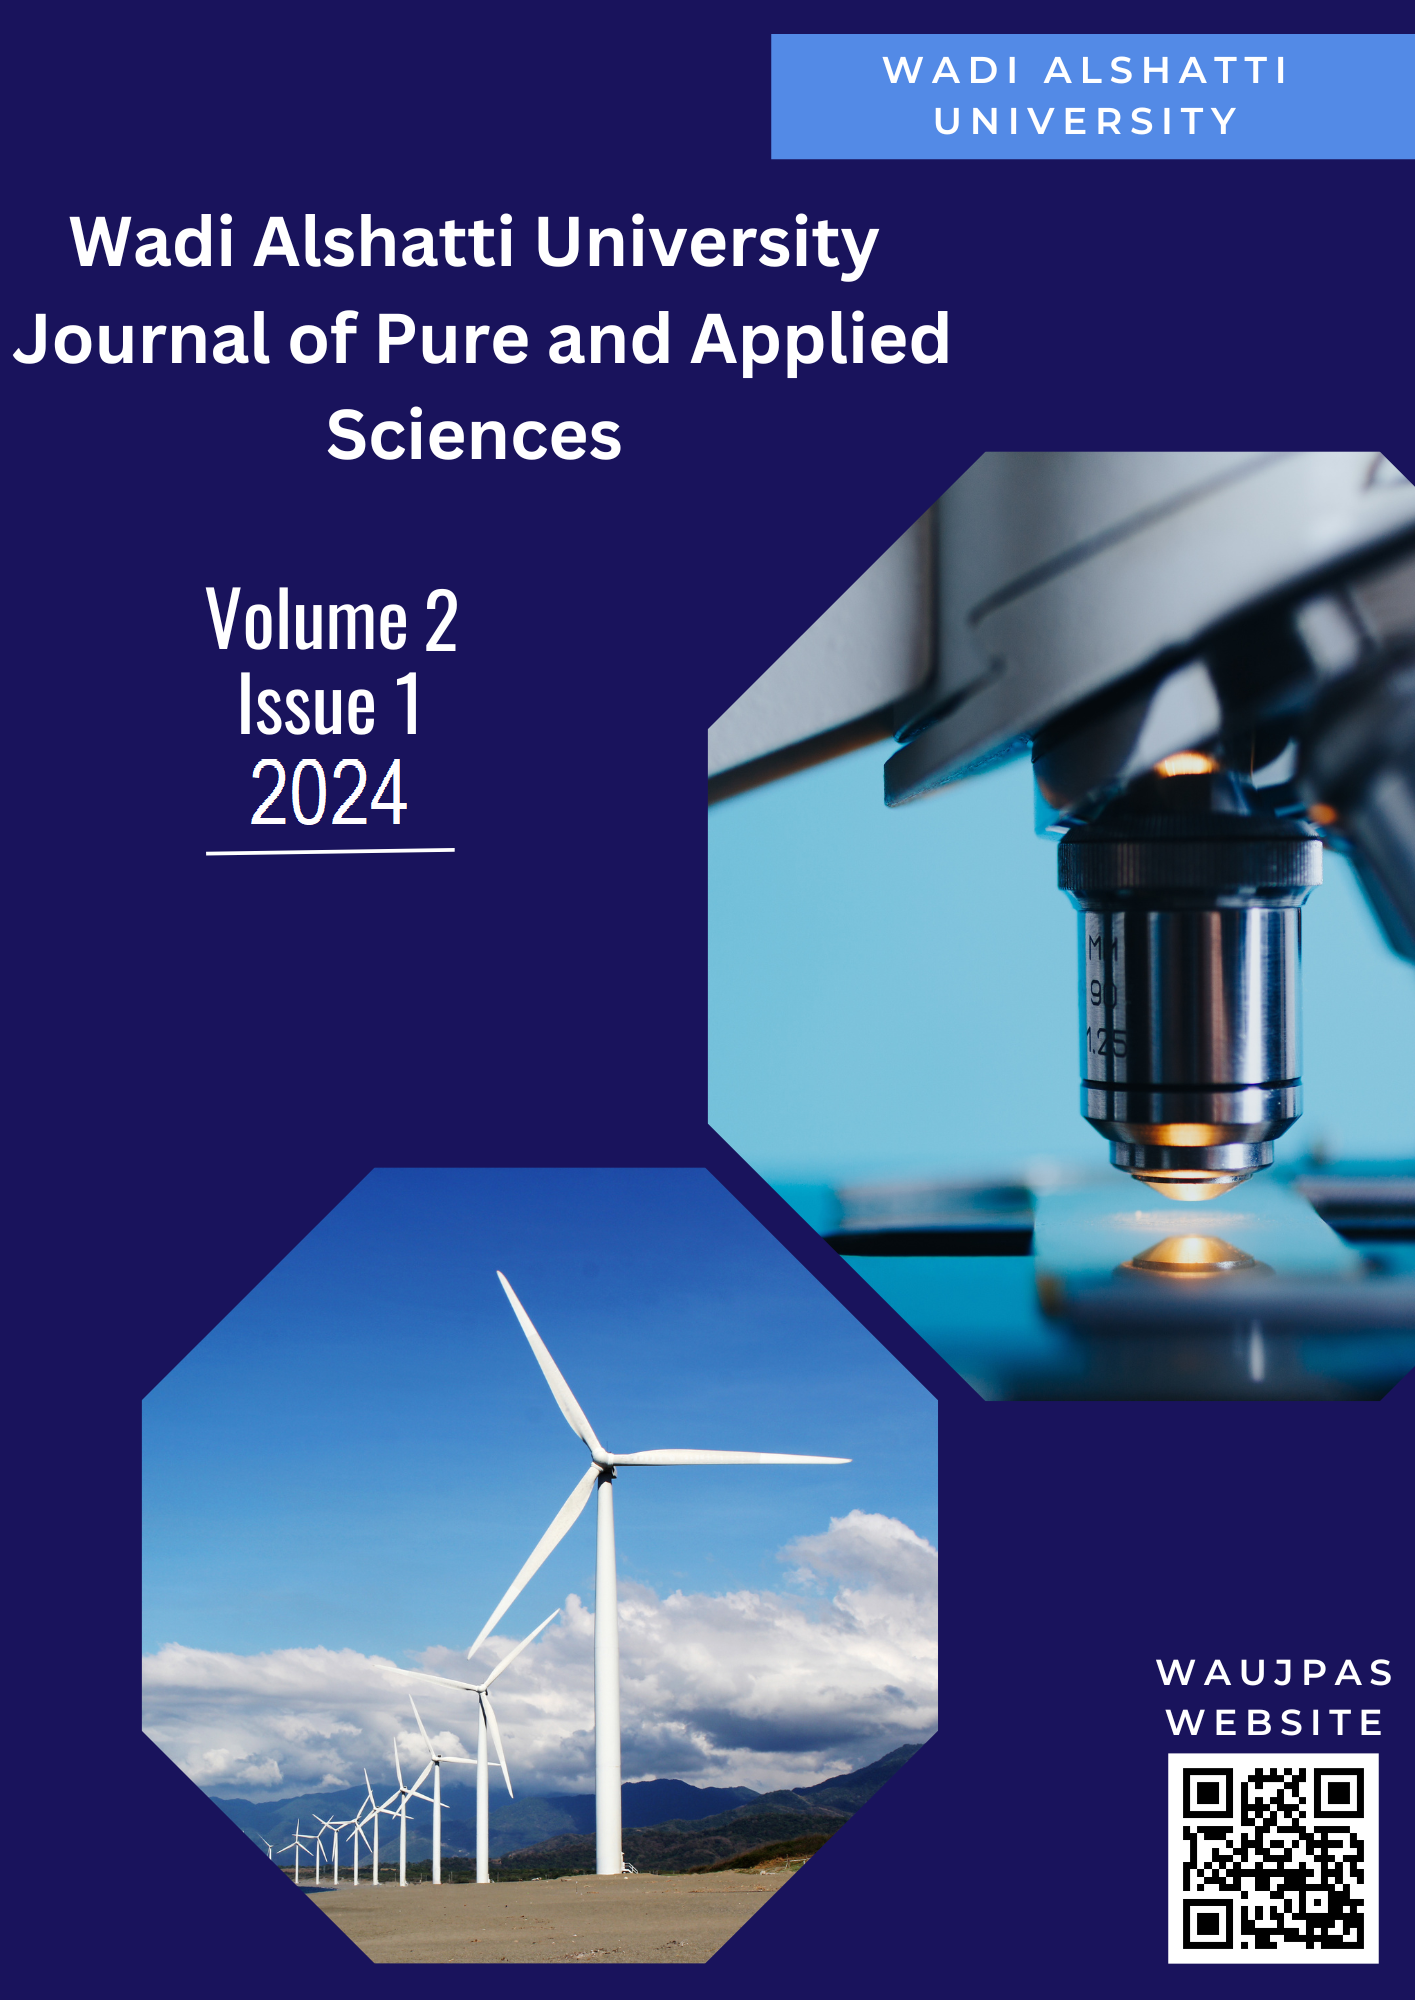 Wadi Alshatti University Journal of Pure and Applied Sciences